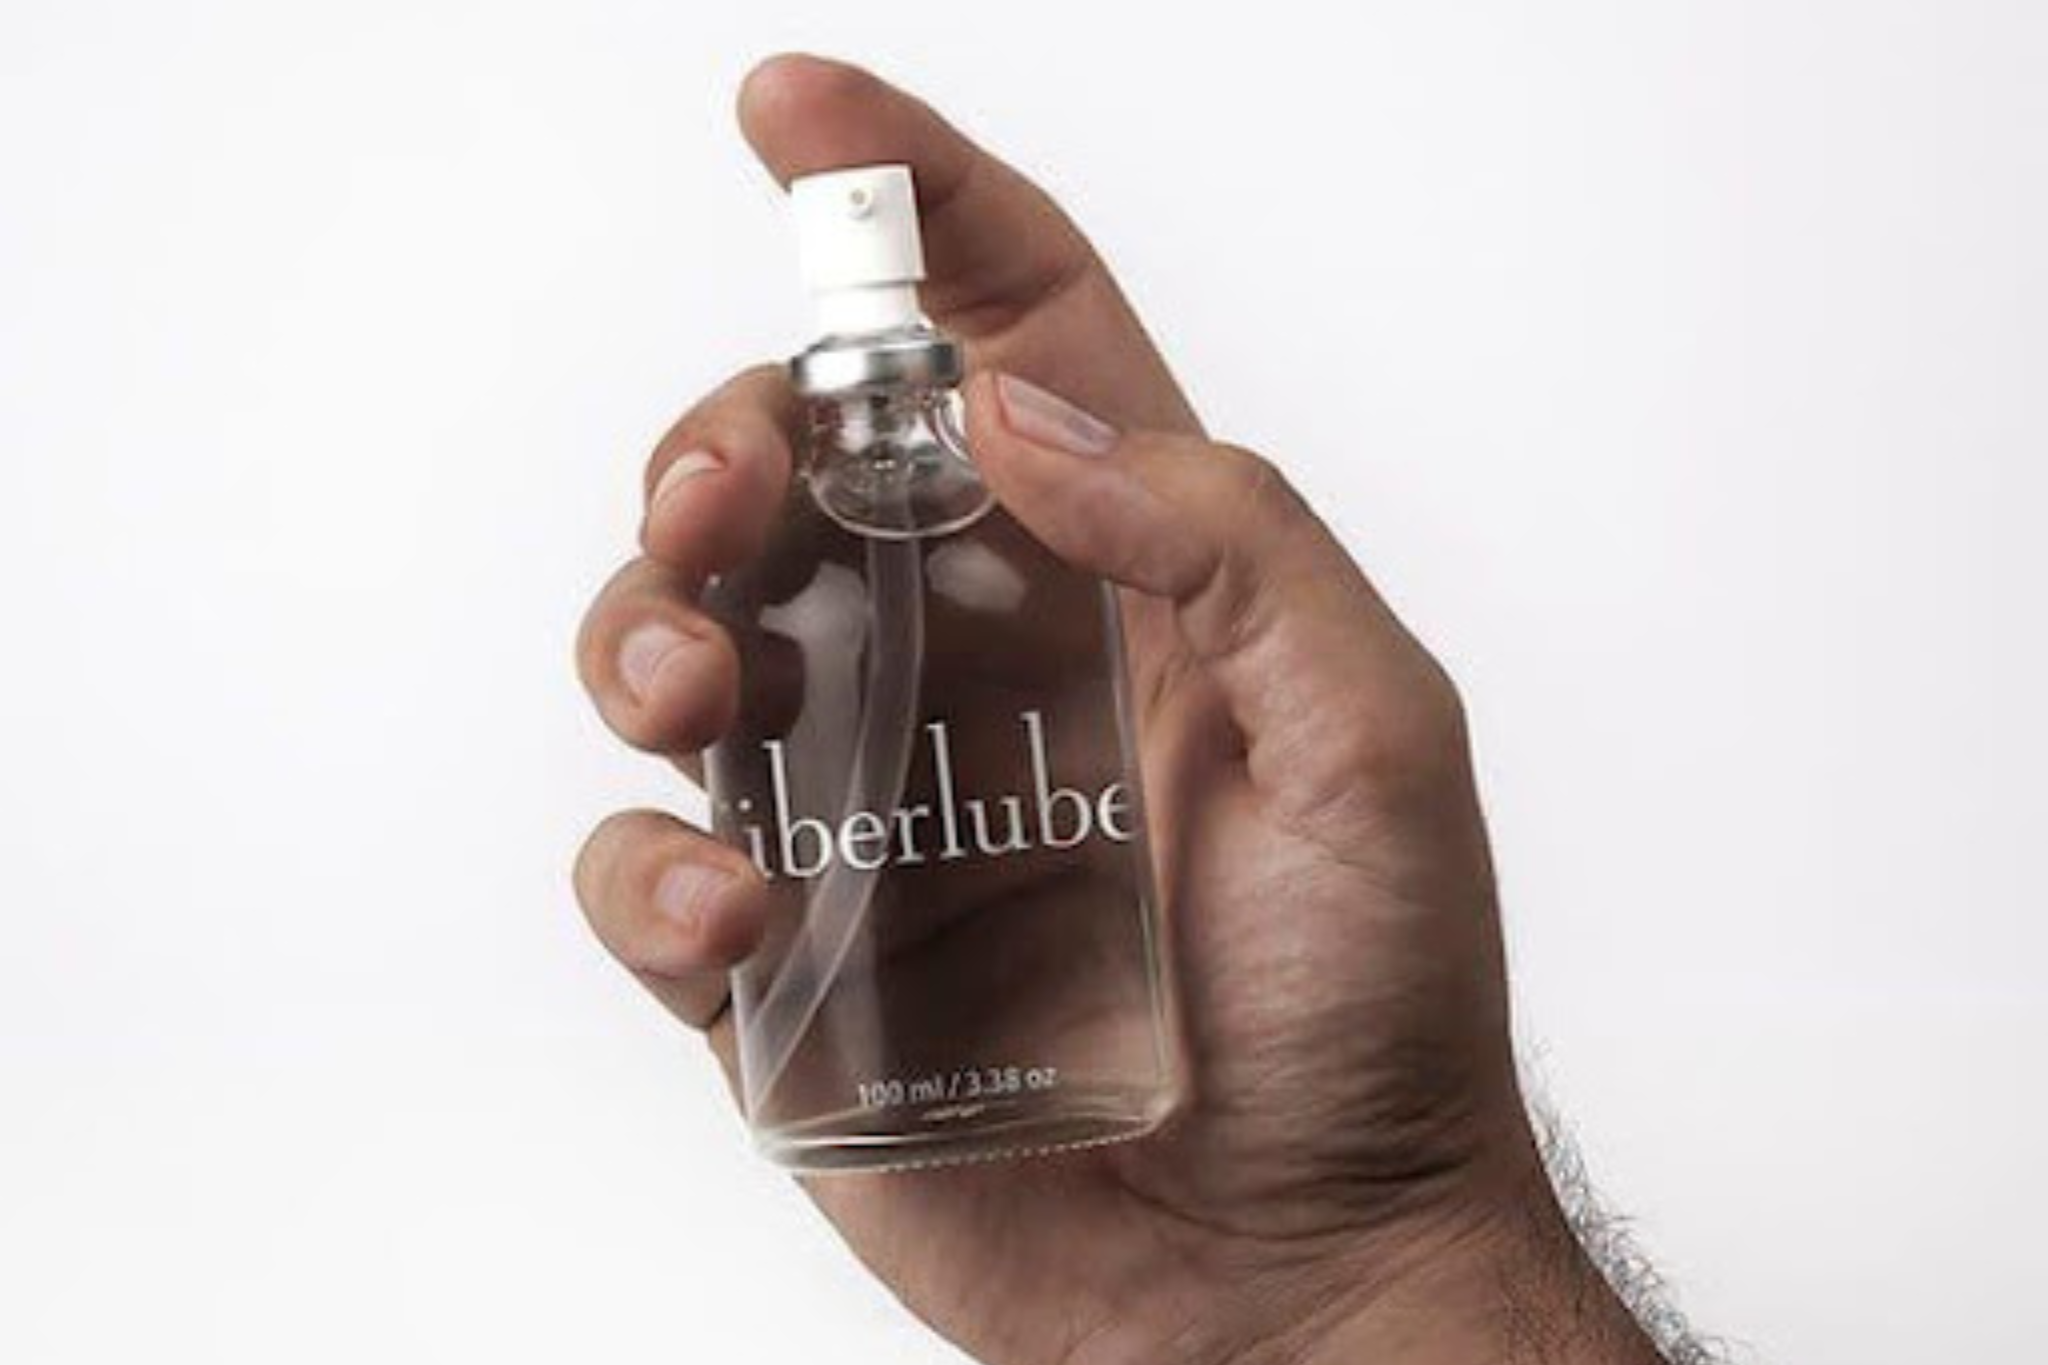 What Is an Überlube?